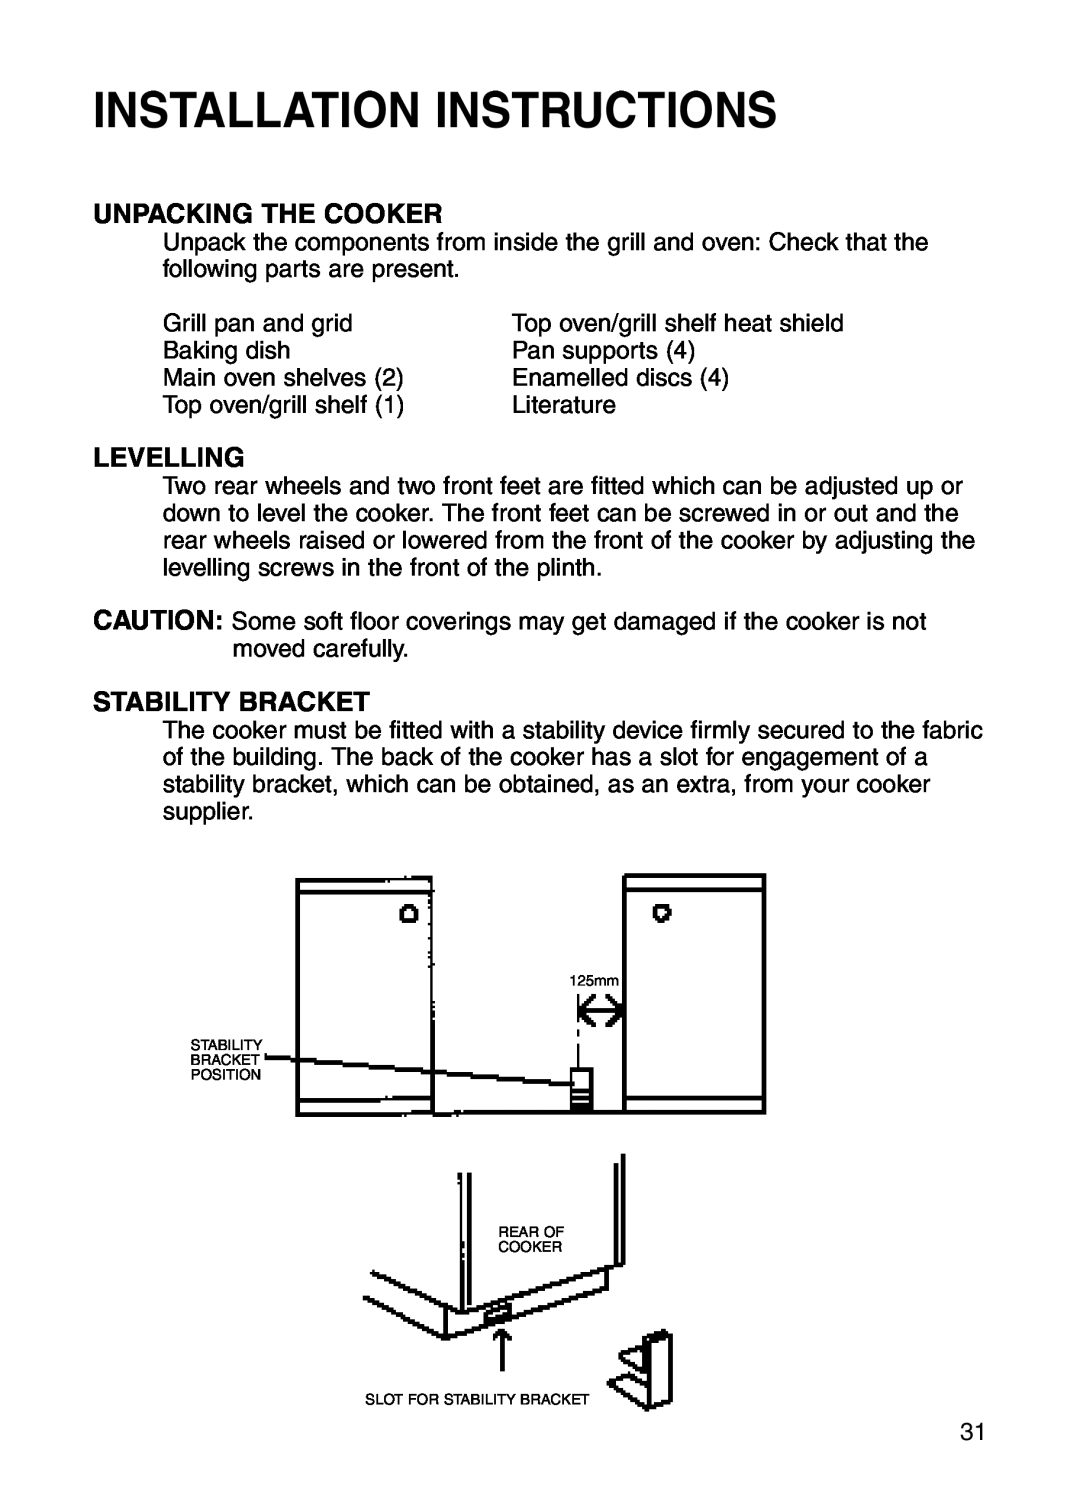 Hotpoint GW81 manual Unpacking The Cooker, Levelling, Stability Bracket, Installation Instructions 